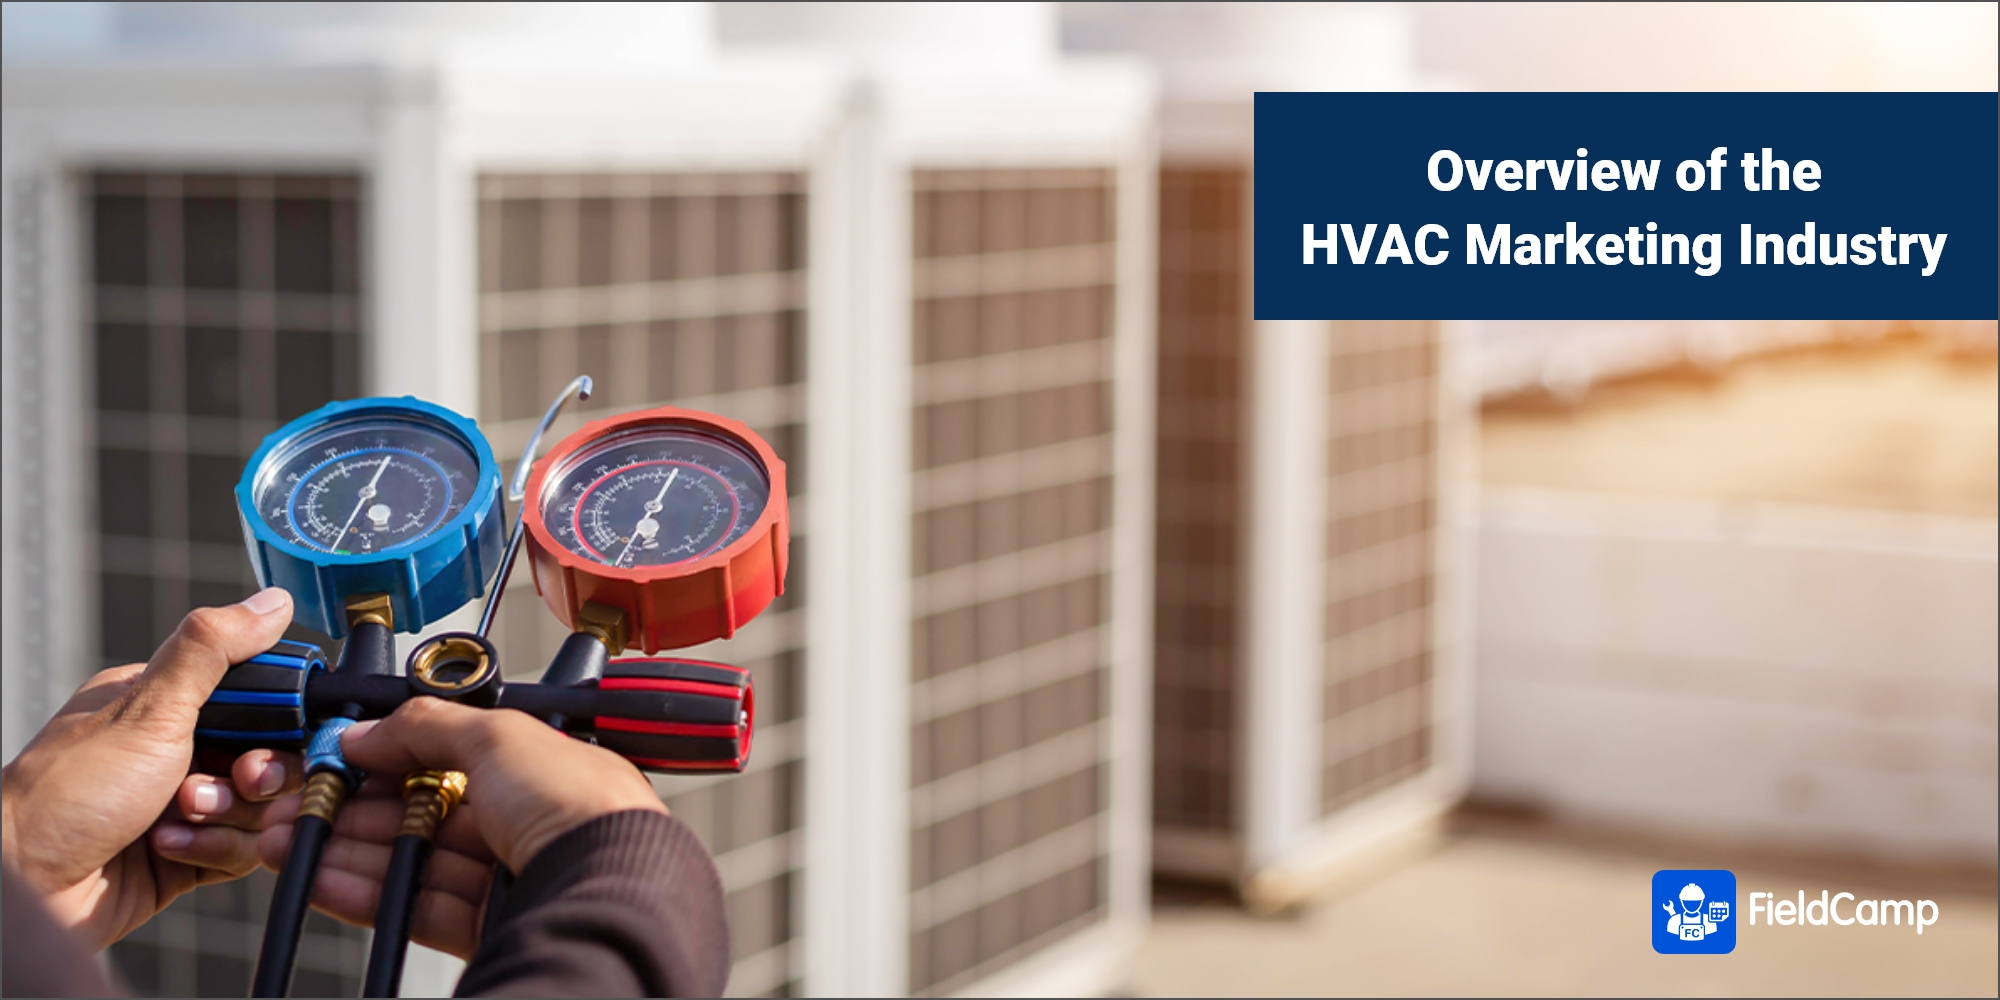 An Overview of the HVAC Marketing Industry